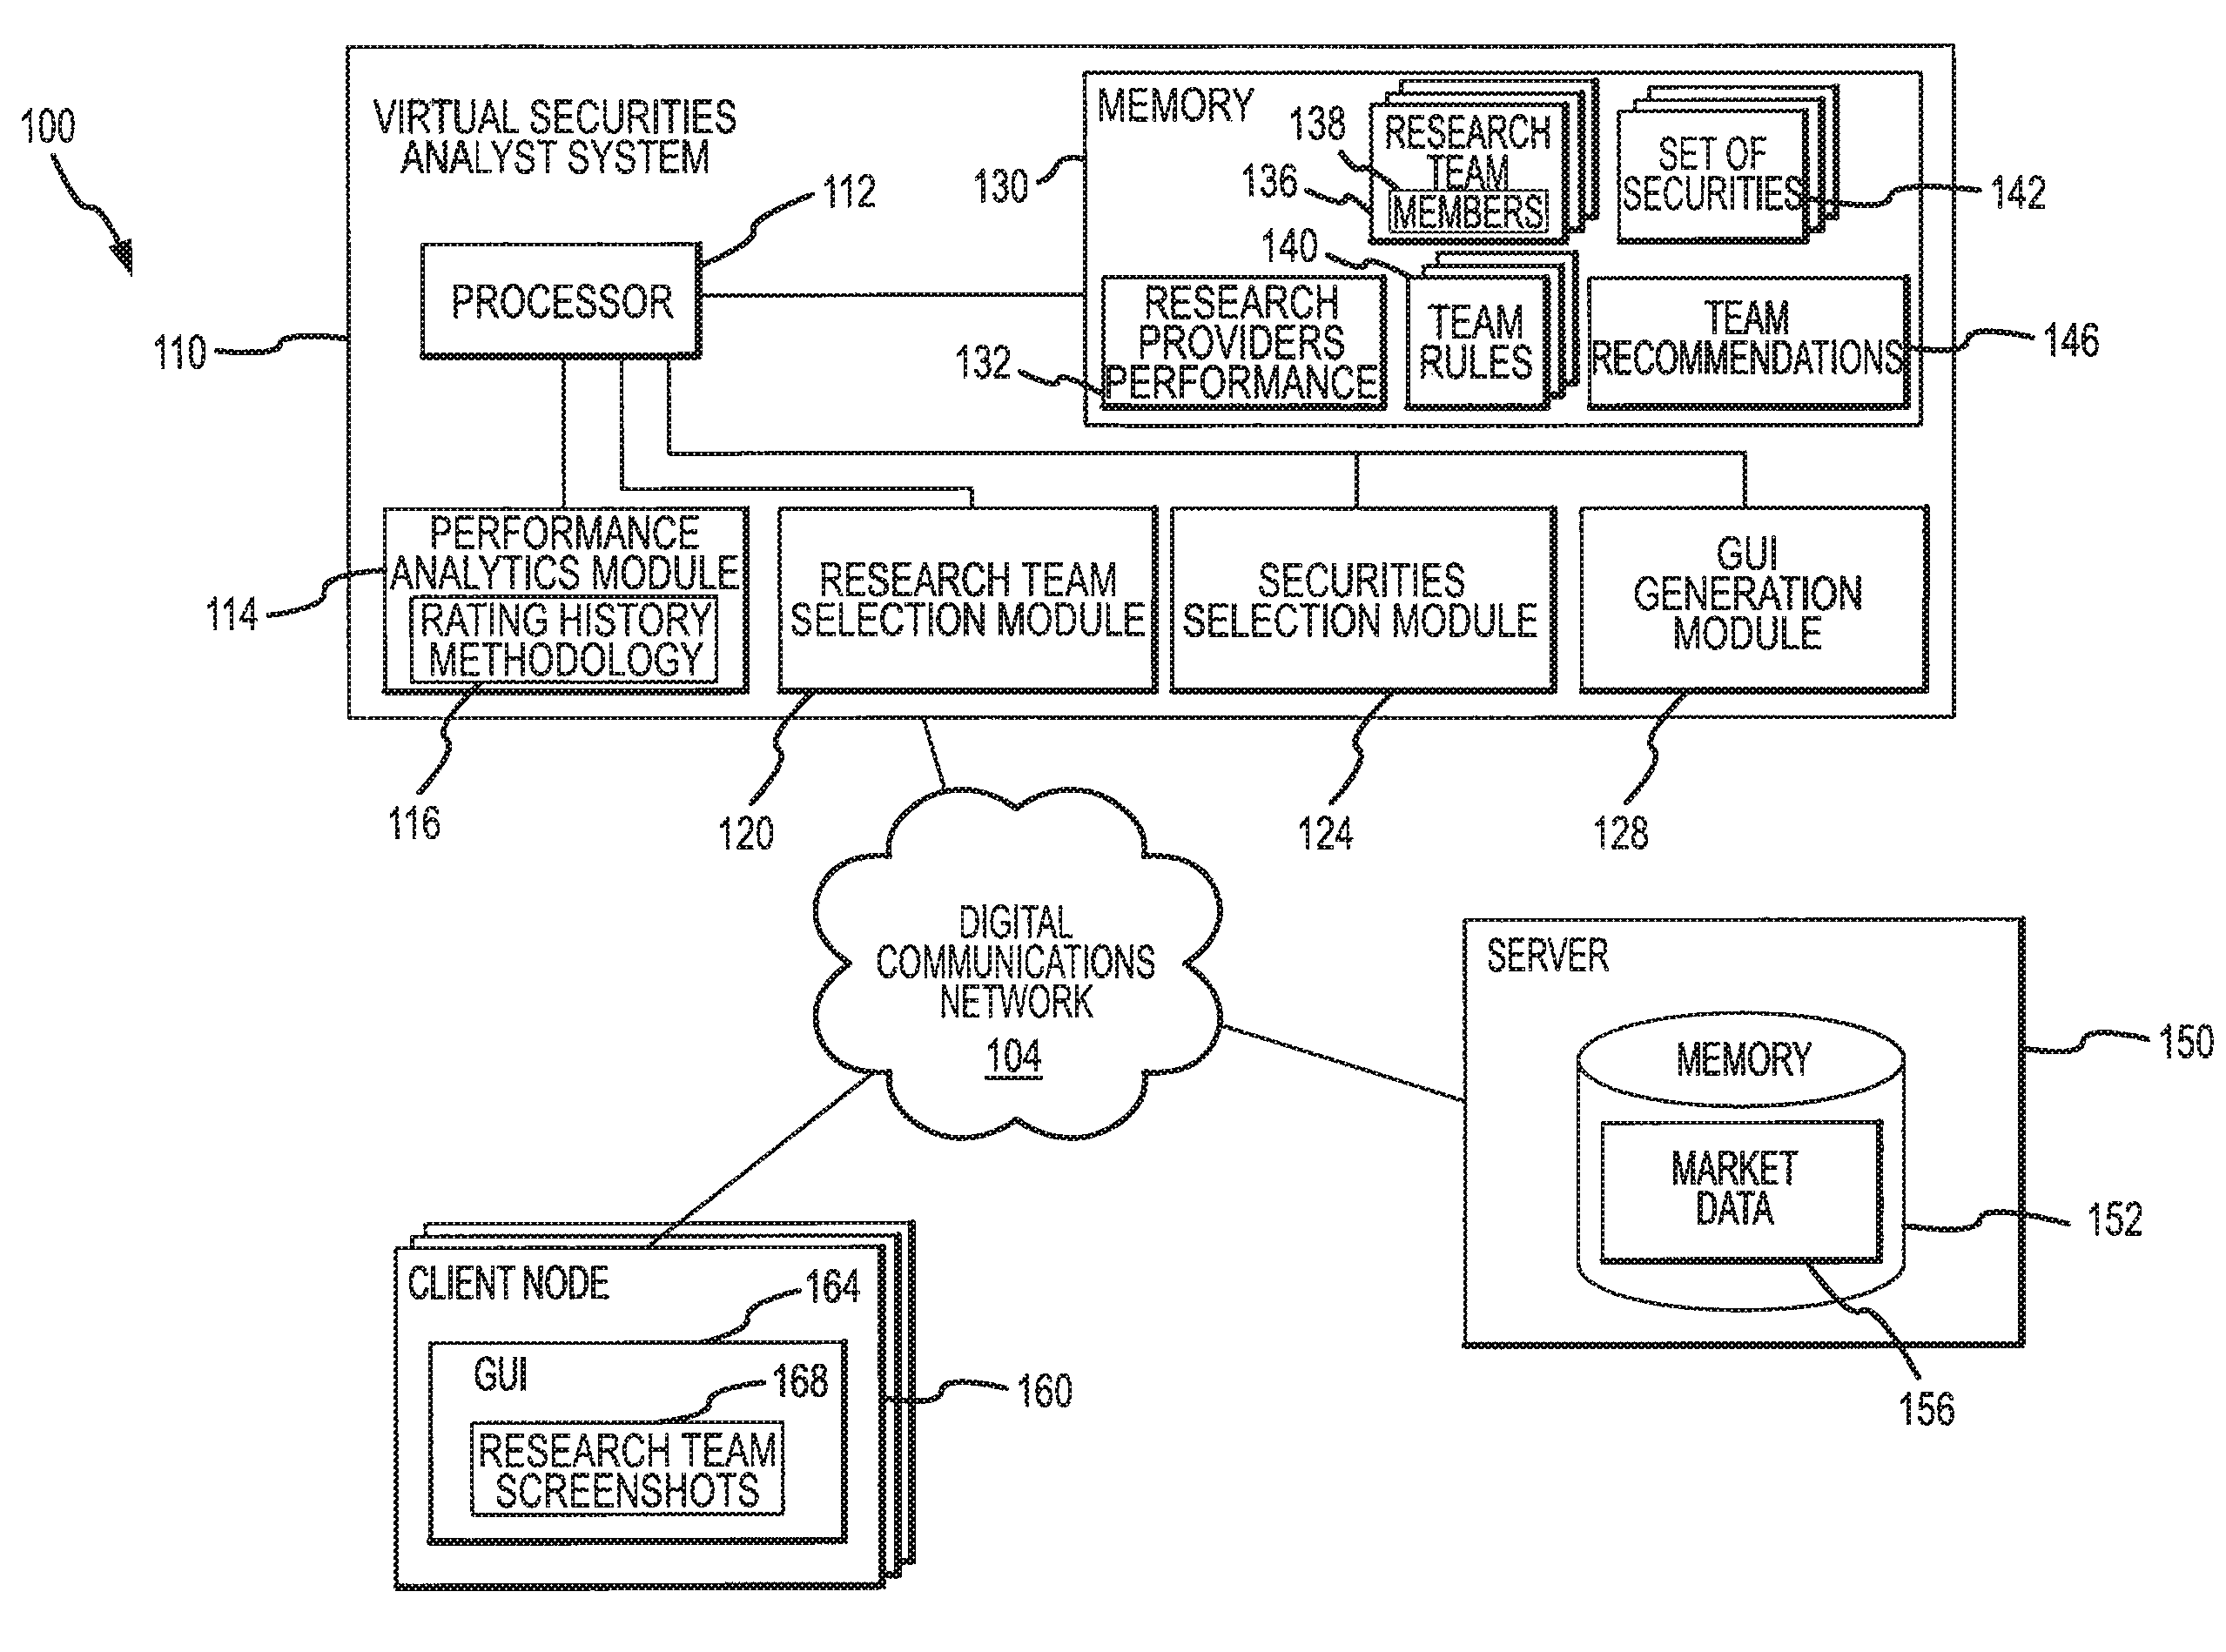 Computer-based method for teaming research analysts to generate improved securities investment recommendations